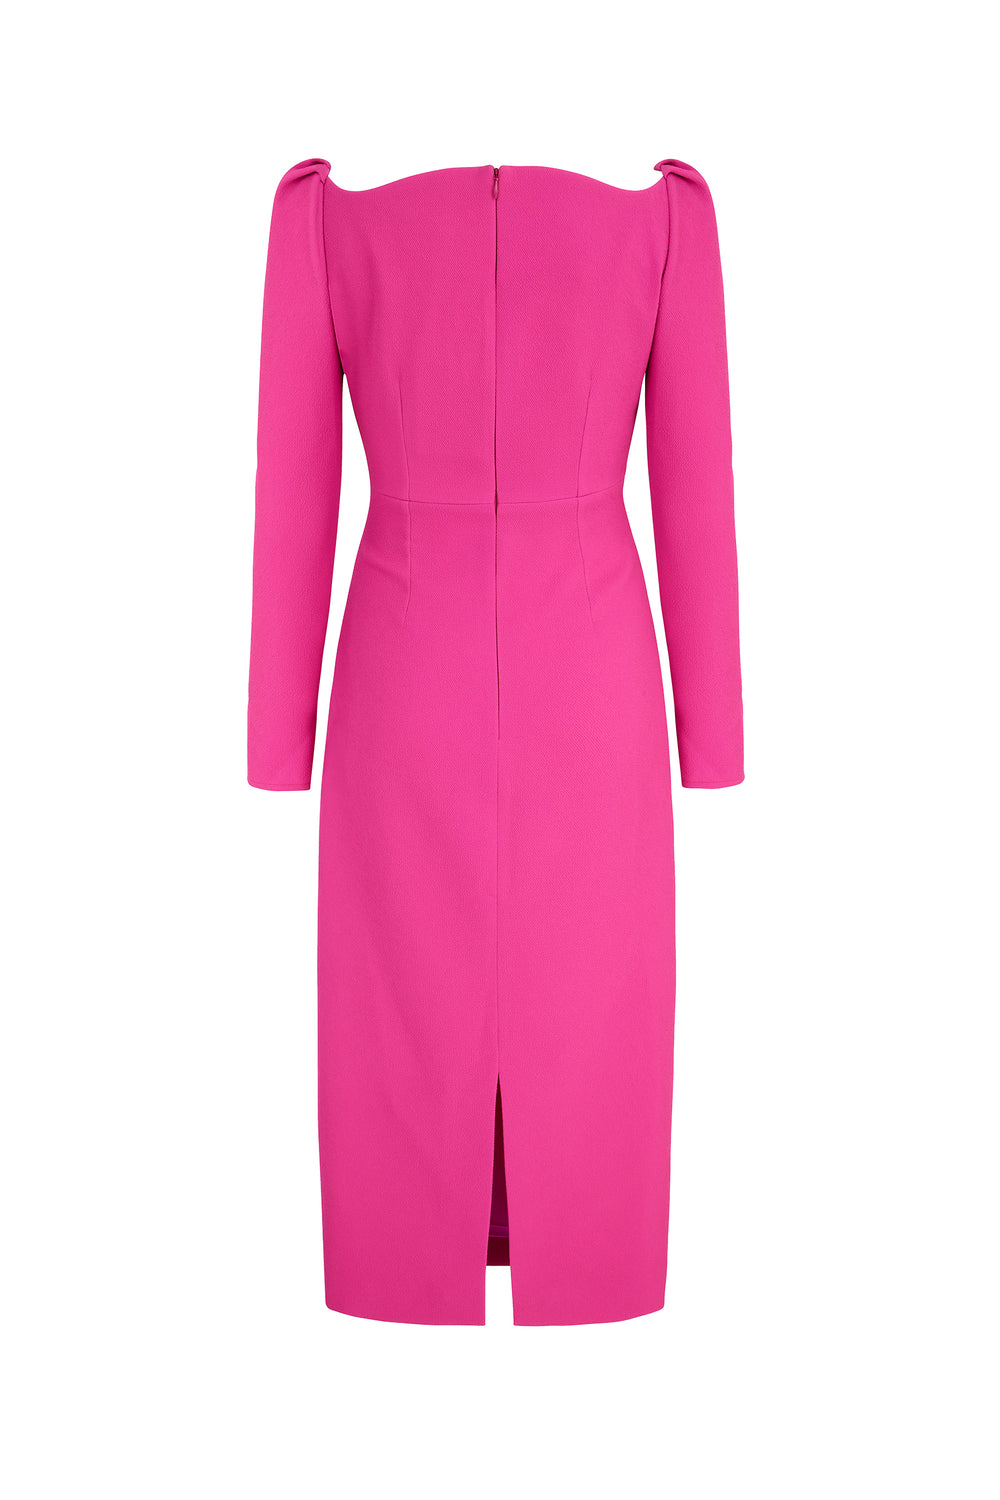 London Crepe Hot | | Dress Halley Pink Stretch Suzannah